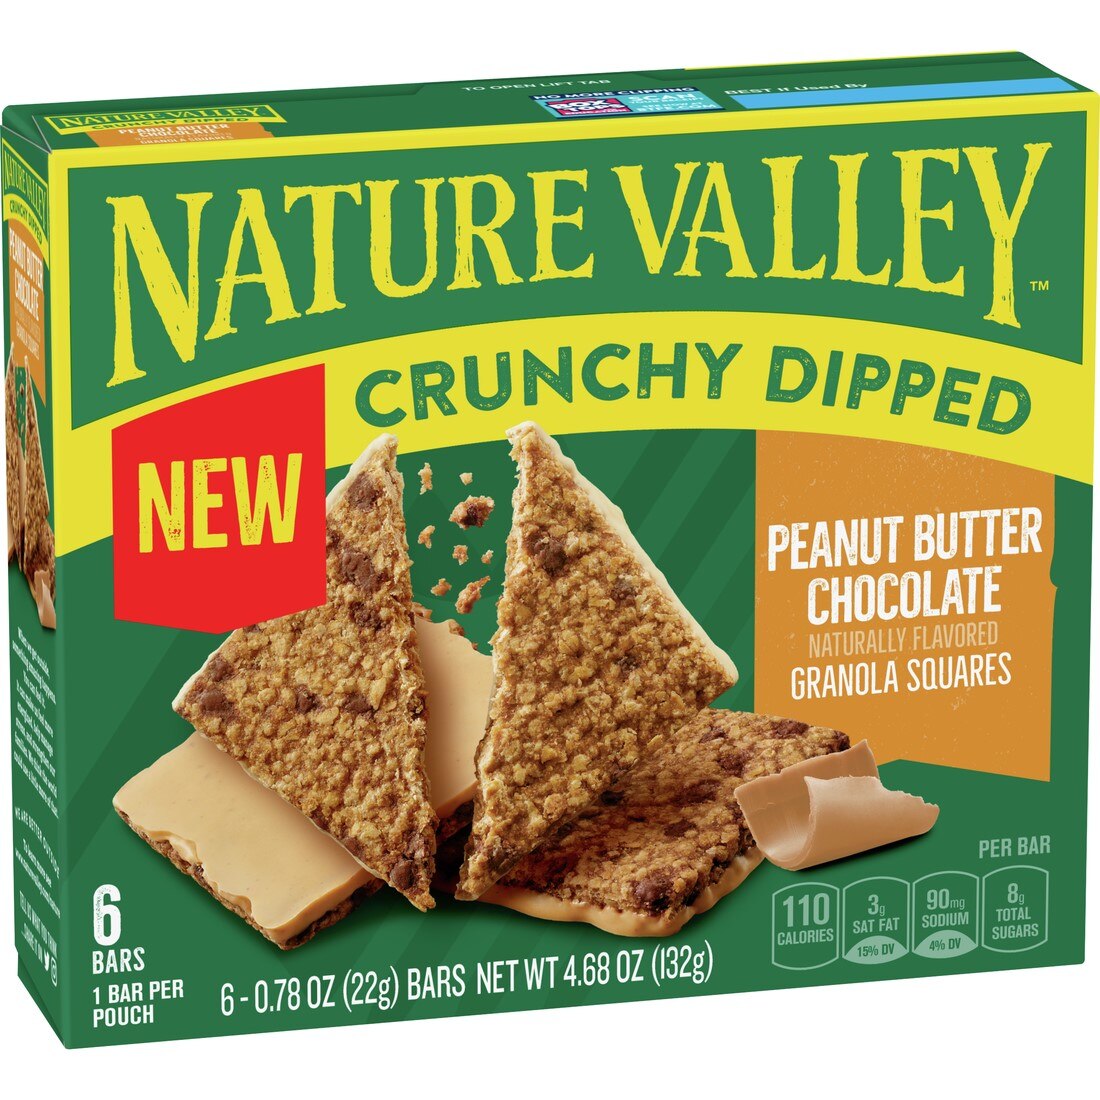 Nature Valley Crunchy Dipped, Peanut Butter Chocolate, 6 CT